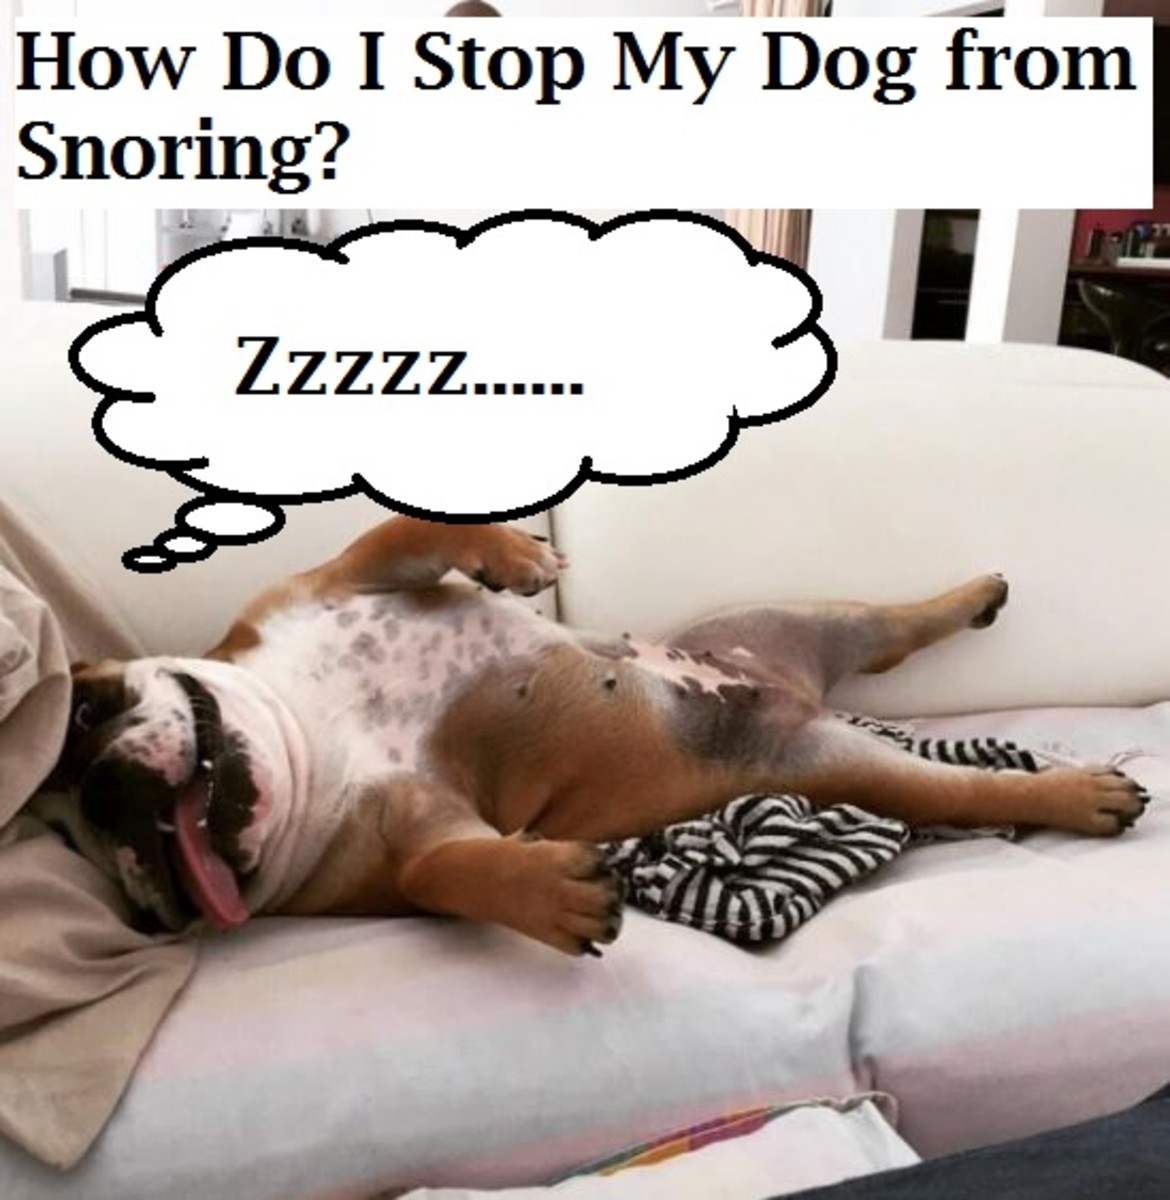 Is your dog's snoring driving you up the wall?